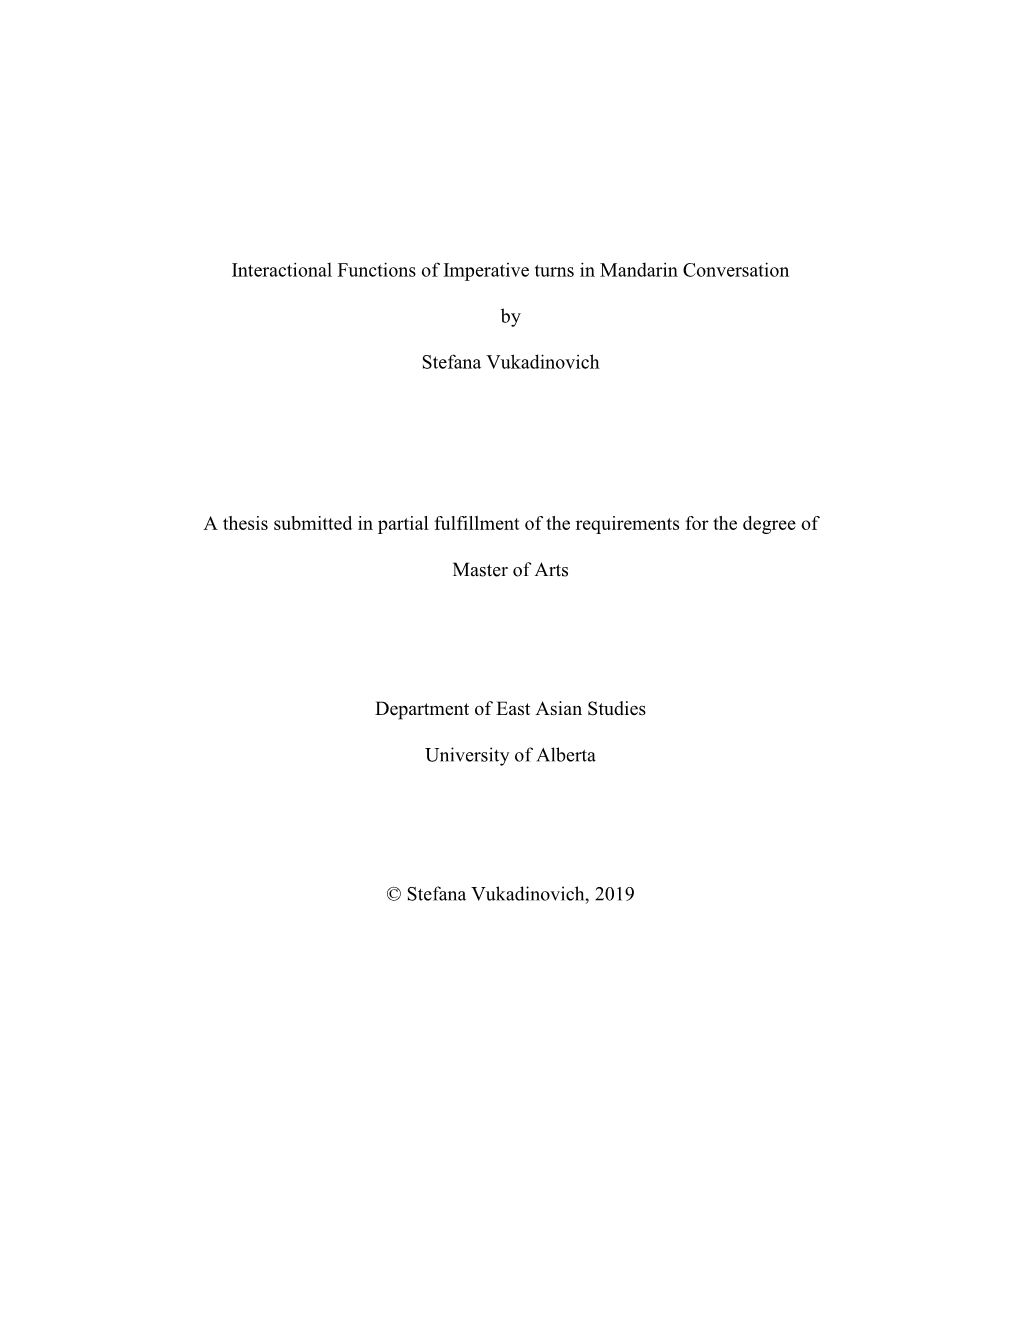 Interactional Functions of Imperative Turns in Mandarin Conversation by Stefana Vukadinovich a Thesis Submitted in Partial Fulfi